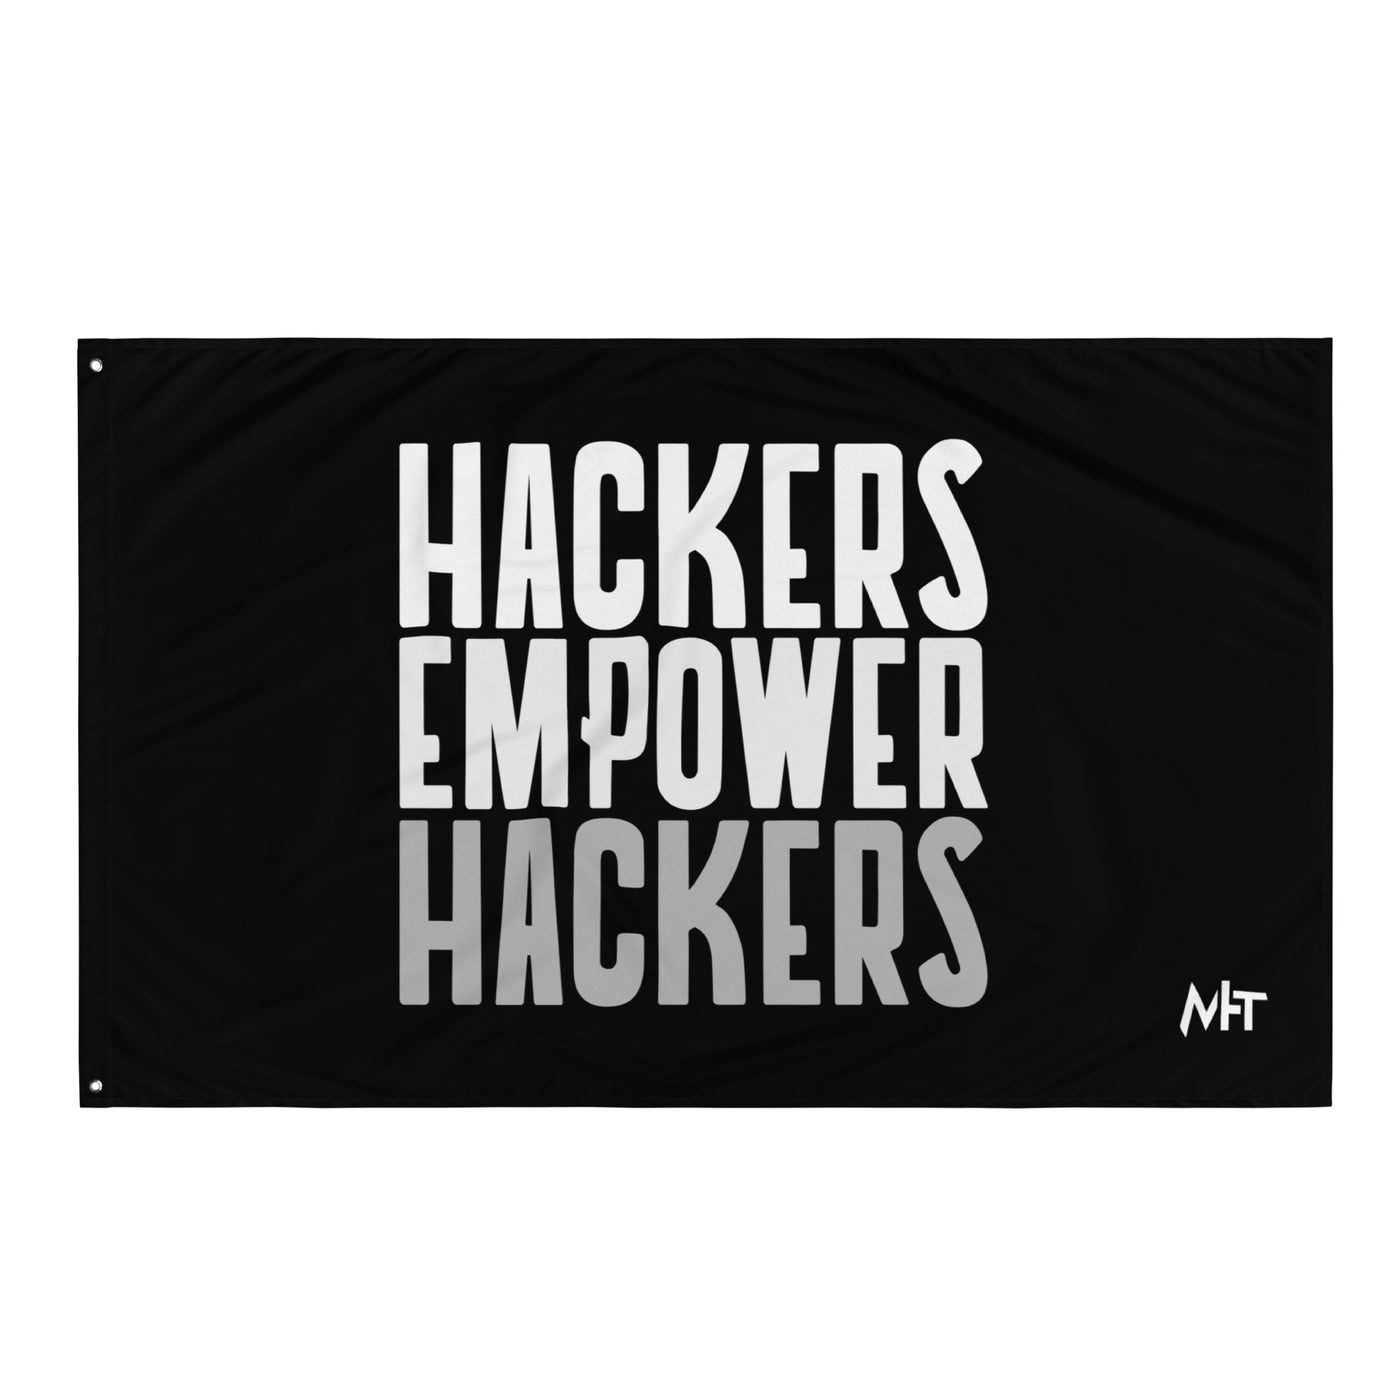 Hackers Empower Hackers - Flag